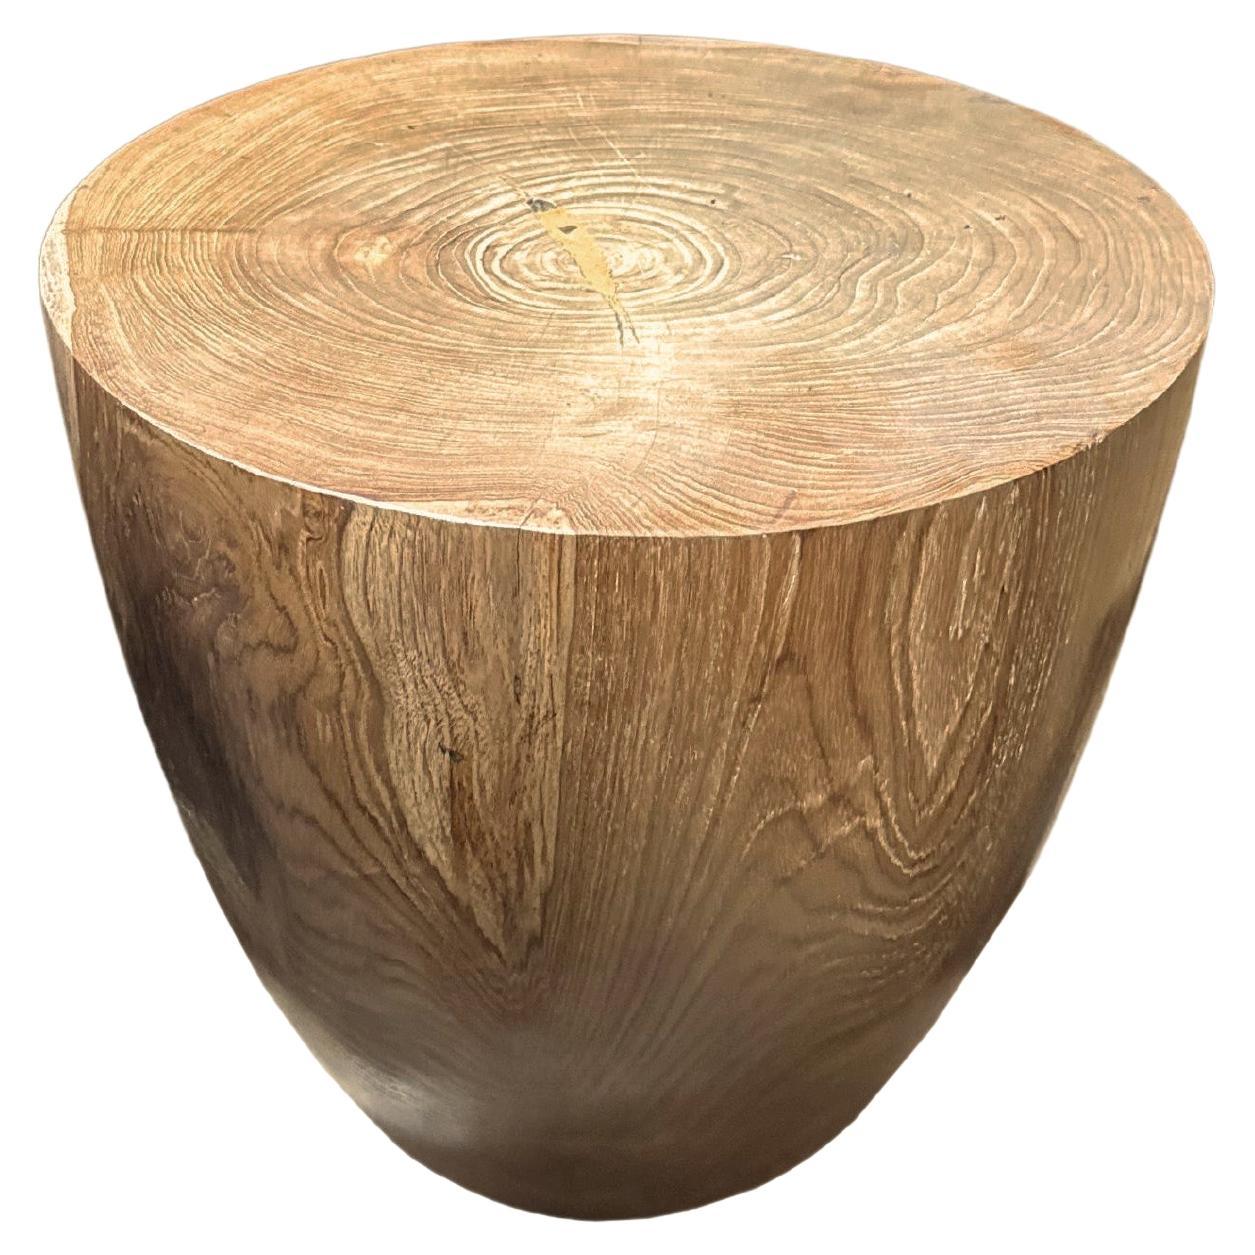 Sculptural Teak Wood Side Table, with Stunning Wood Textures, Modern Organic For Sale